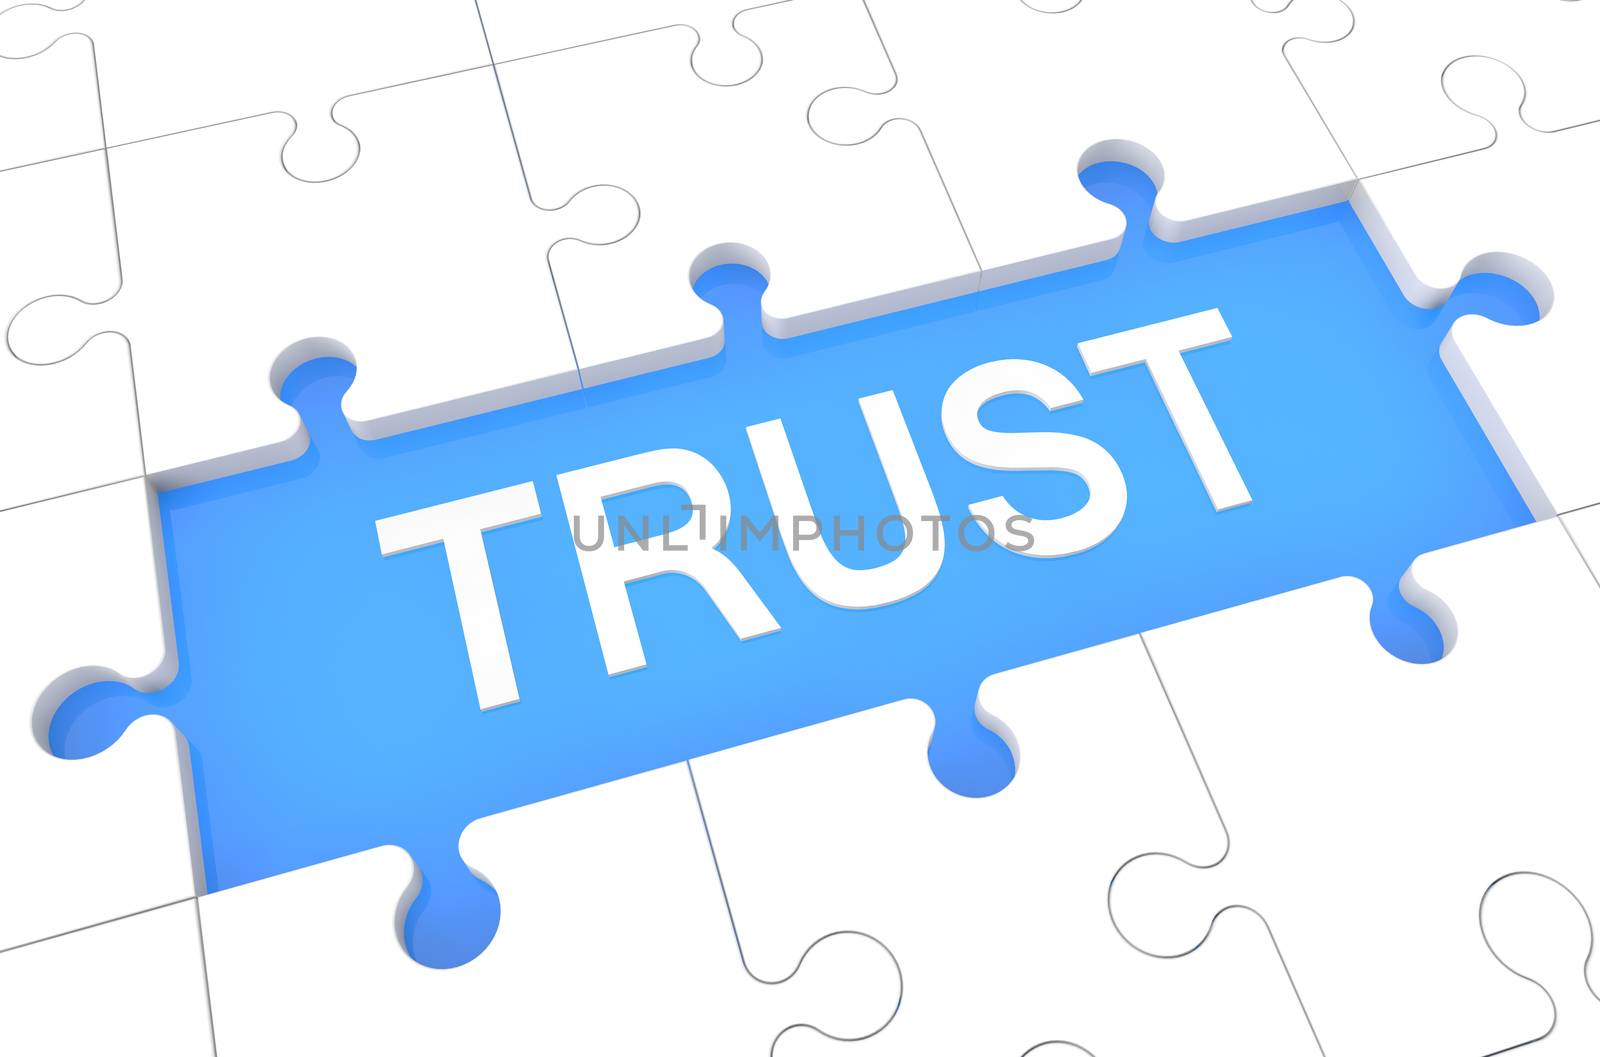 Trust - puzzle 3d render illustration with word on blue background